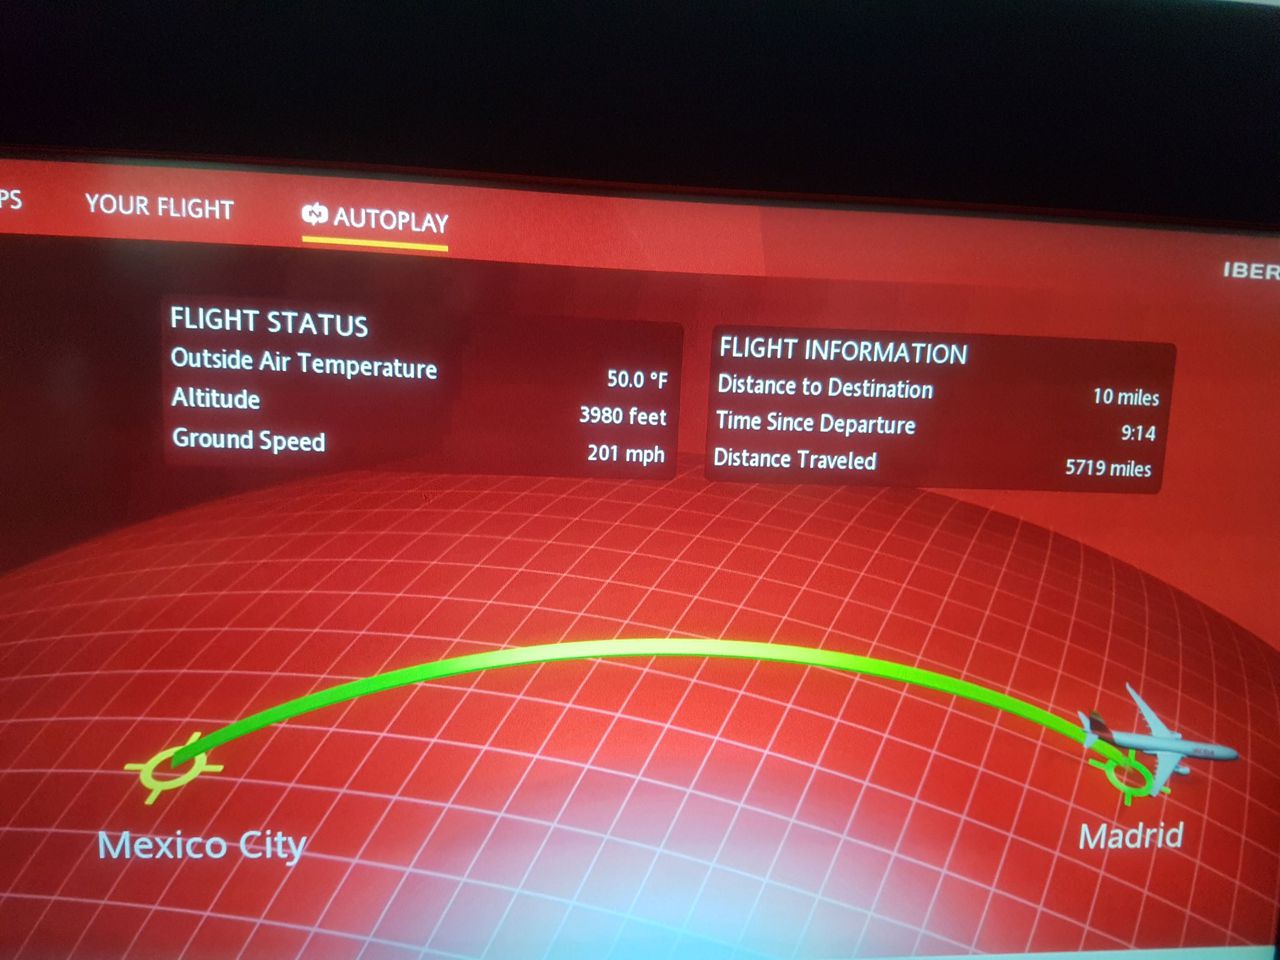 Review of Iberia flight from Mexico City to in Business